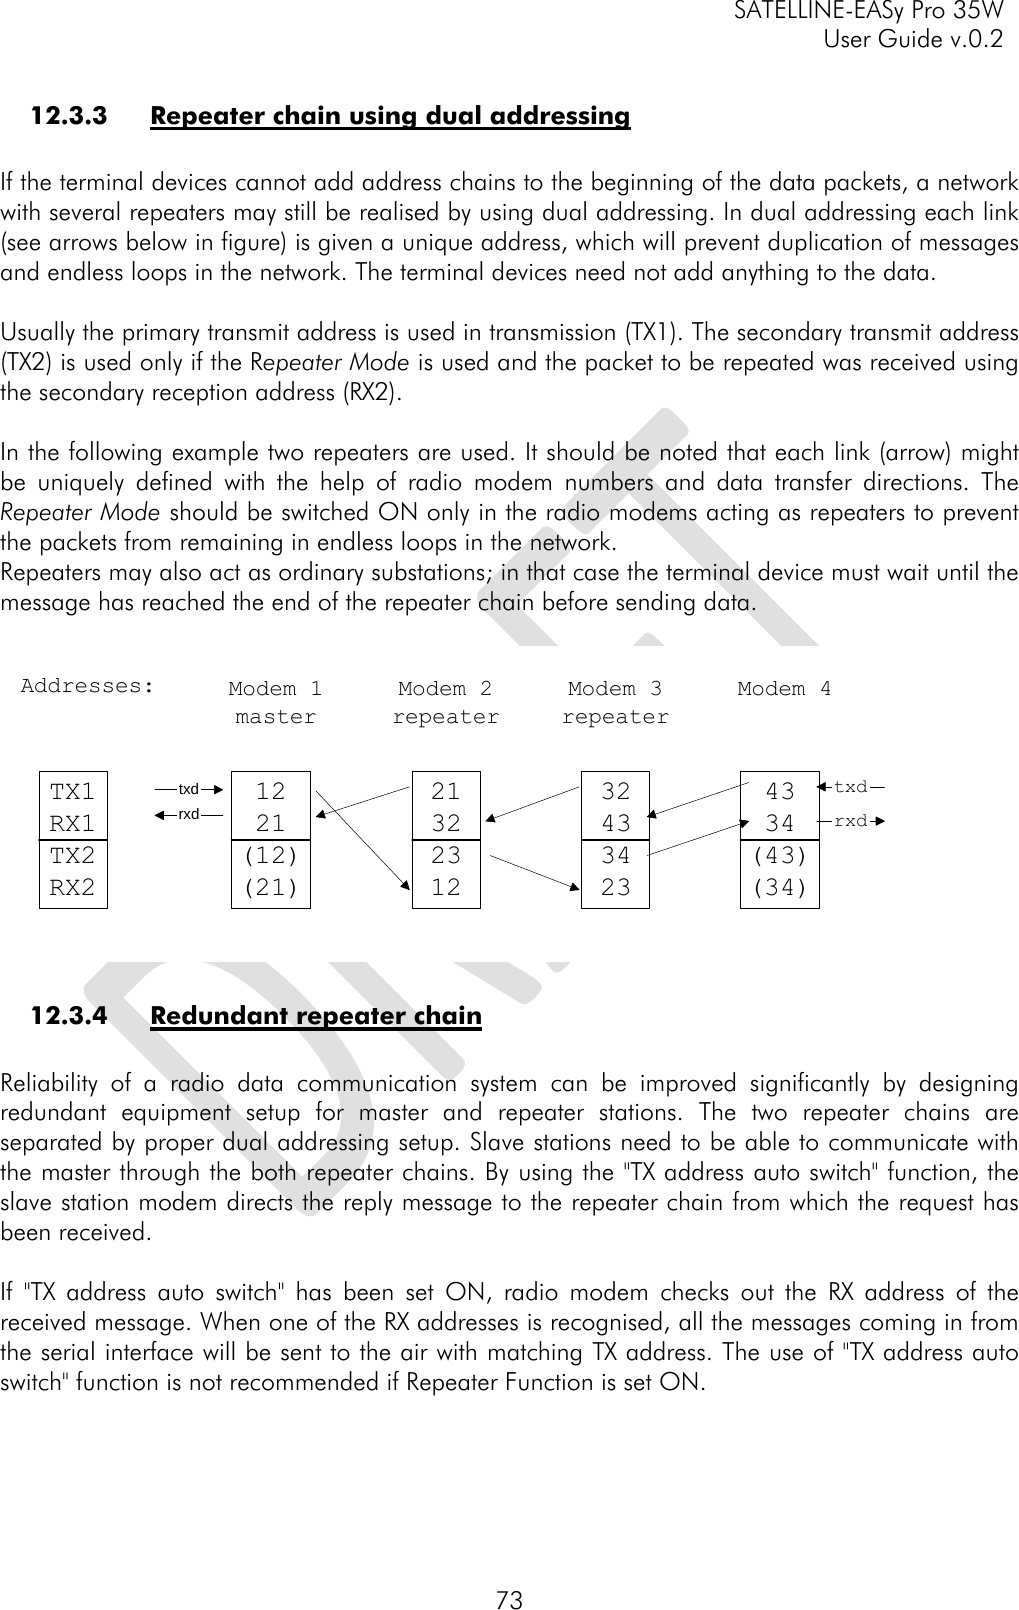     SATELLINE-EASy Pro 35W   User Guide v.0.2  73 12.3.3 Repeater chain using dual addressing  If the terminal devices cannot add address chains to the beginning of the data packets, a network with several repeaters may still be realised by using dual addressing. In dual addressing each link (see arrows below in figure) is given a unique address, which will prevent duplication of messages and endless loops in the network. The terminal devices need not add anything to the data.  Usually the primary transmit address is used in transmission (TX1). The secondary transmit address (TX2) is used only if the Repeater Mode is used and the packet to be repeated was received using the secondary reception address (RX2).  In the following example two repeaters are used. It should be noted that each link (arrow) might be uniquely defined with the help of radio modem numbers and data transfer directions. The Repeater Mode should be switched ON only in the radio modems acting as repeaters to prevent the packets from remaining in endless loops in the network.  Repeaters may also act as ordinary substations; in that case the terminal device must wait until the message has reached the end of the repeater chain before sending data.             12.3.4 Redundant repeater chain  Reliability of a radio data communication system can be improved significantly by designing redundant equipment setup for master and repeater stations. The two repeater chains are separated by proper dual addressing setup. Slave stations need to be able to communicate with the master through the both repeater chains. By using the &quot;TX address auto switch&quot; function, the slave station modem directs the reply message to the repeater chain from which the request has been received.  If &quot;TX address auto switch&quot; has been set ON, radio modem checks out the RX address of the received message. When one of the RX addresses is recognised, all the messages coming in from the serial interface will be sent to the air with matching TX address. The use of &quot;TX address auto switch&quot; function is not recommended if Repeater Function is set ON. 1221(12)(21)21322312324334234334(43)(34)rxdtxdrxdtxdModem 1masterModem 2repeaterModem 3repeaterModem 4TX1RX1TX2RX2Addresses: